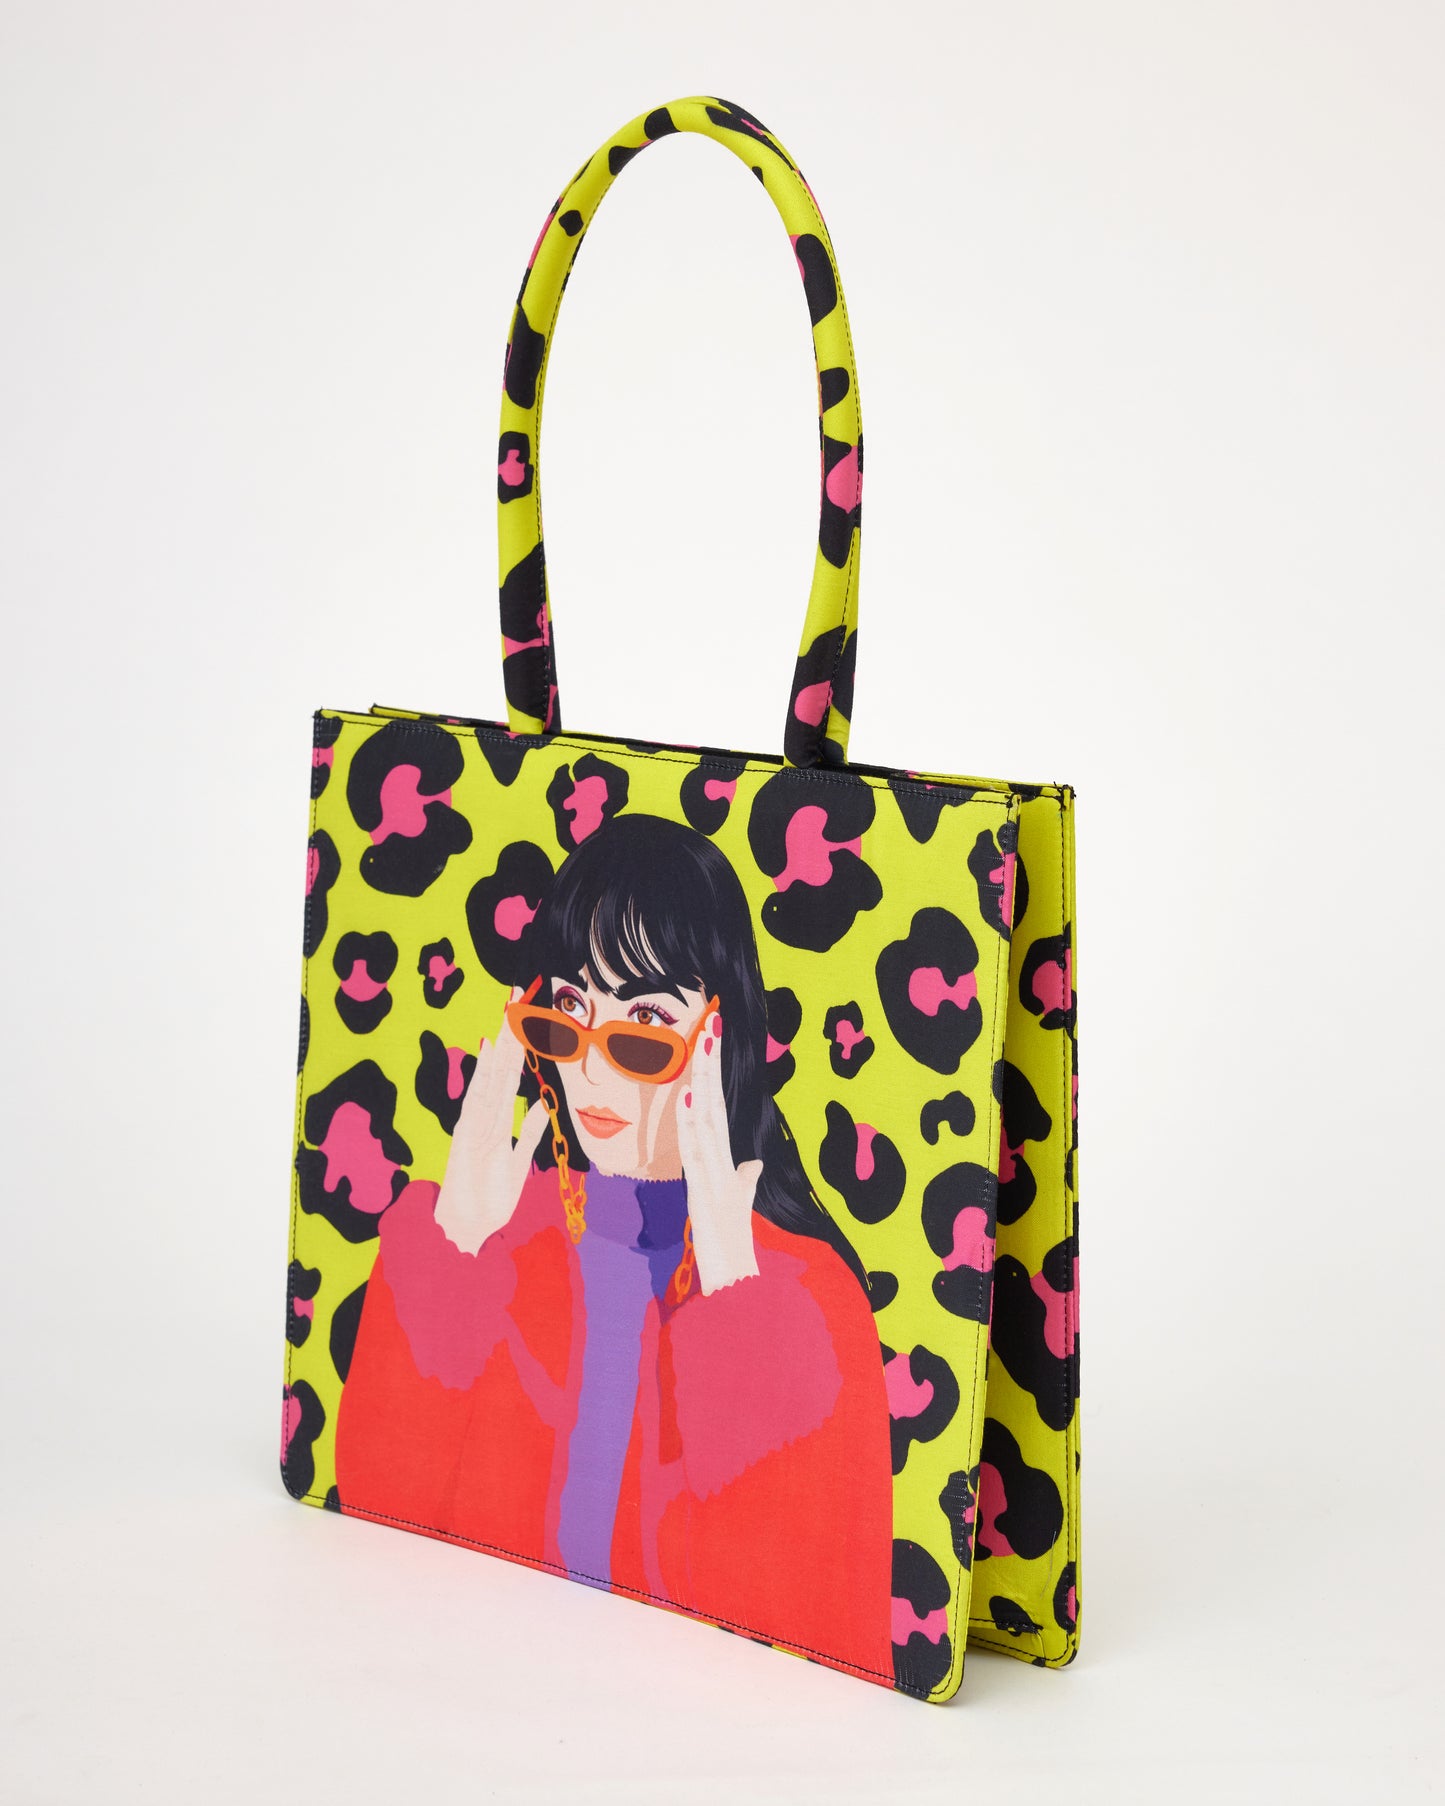 My Eyes On You Tote Bag